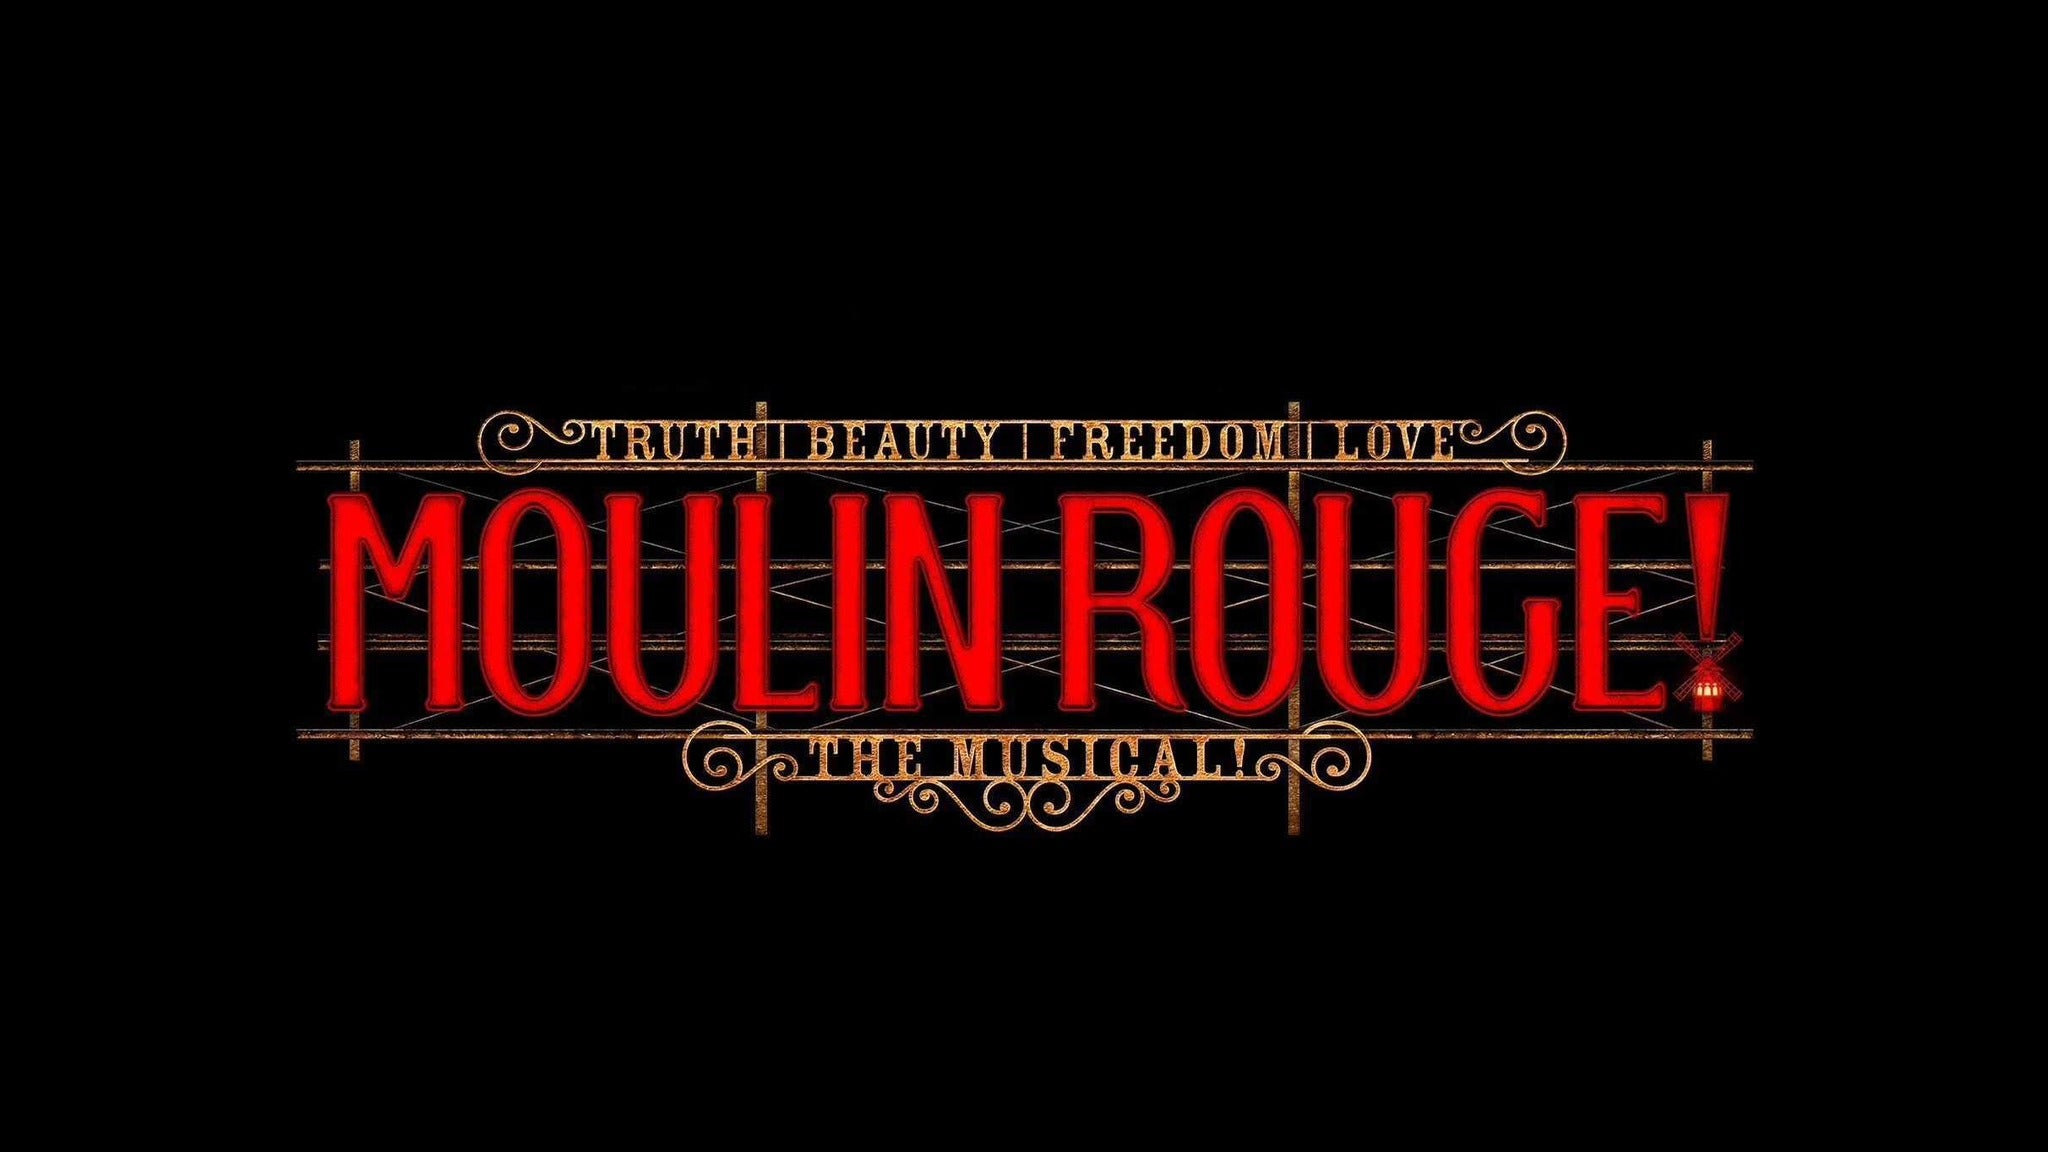 Moulin Rouge at Orpheum Theatre-San Francisco